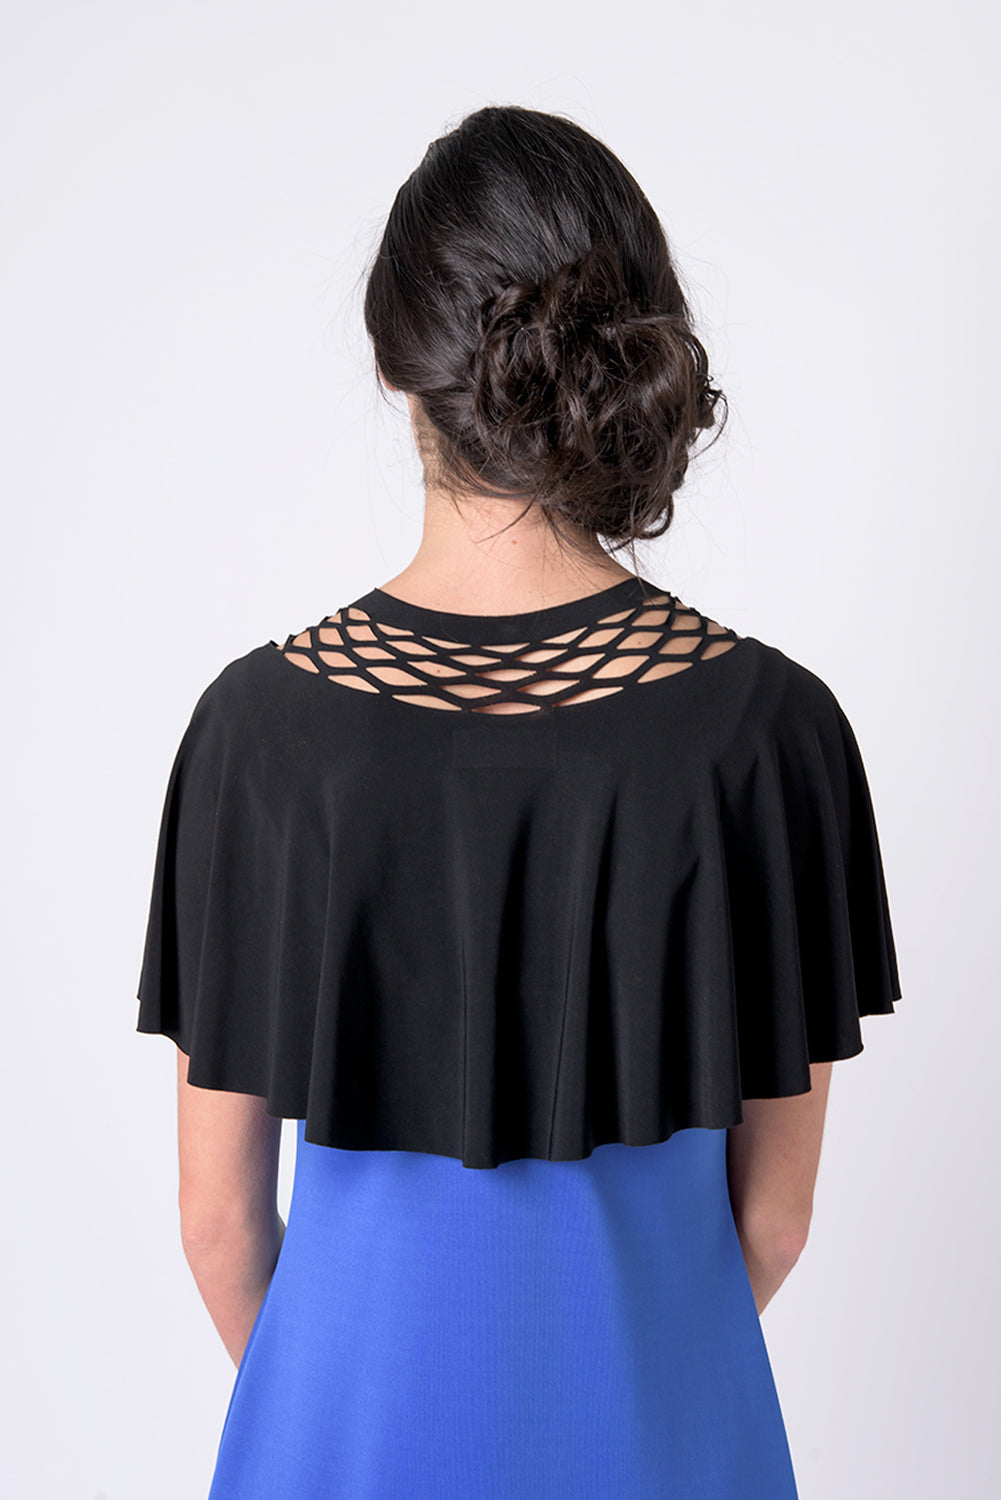 A special top for the event with a chain cut - black top